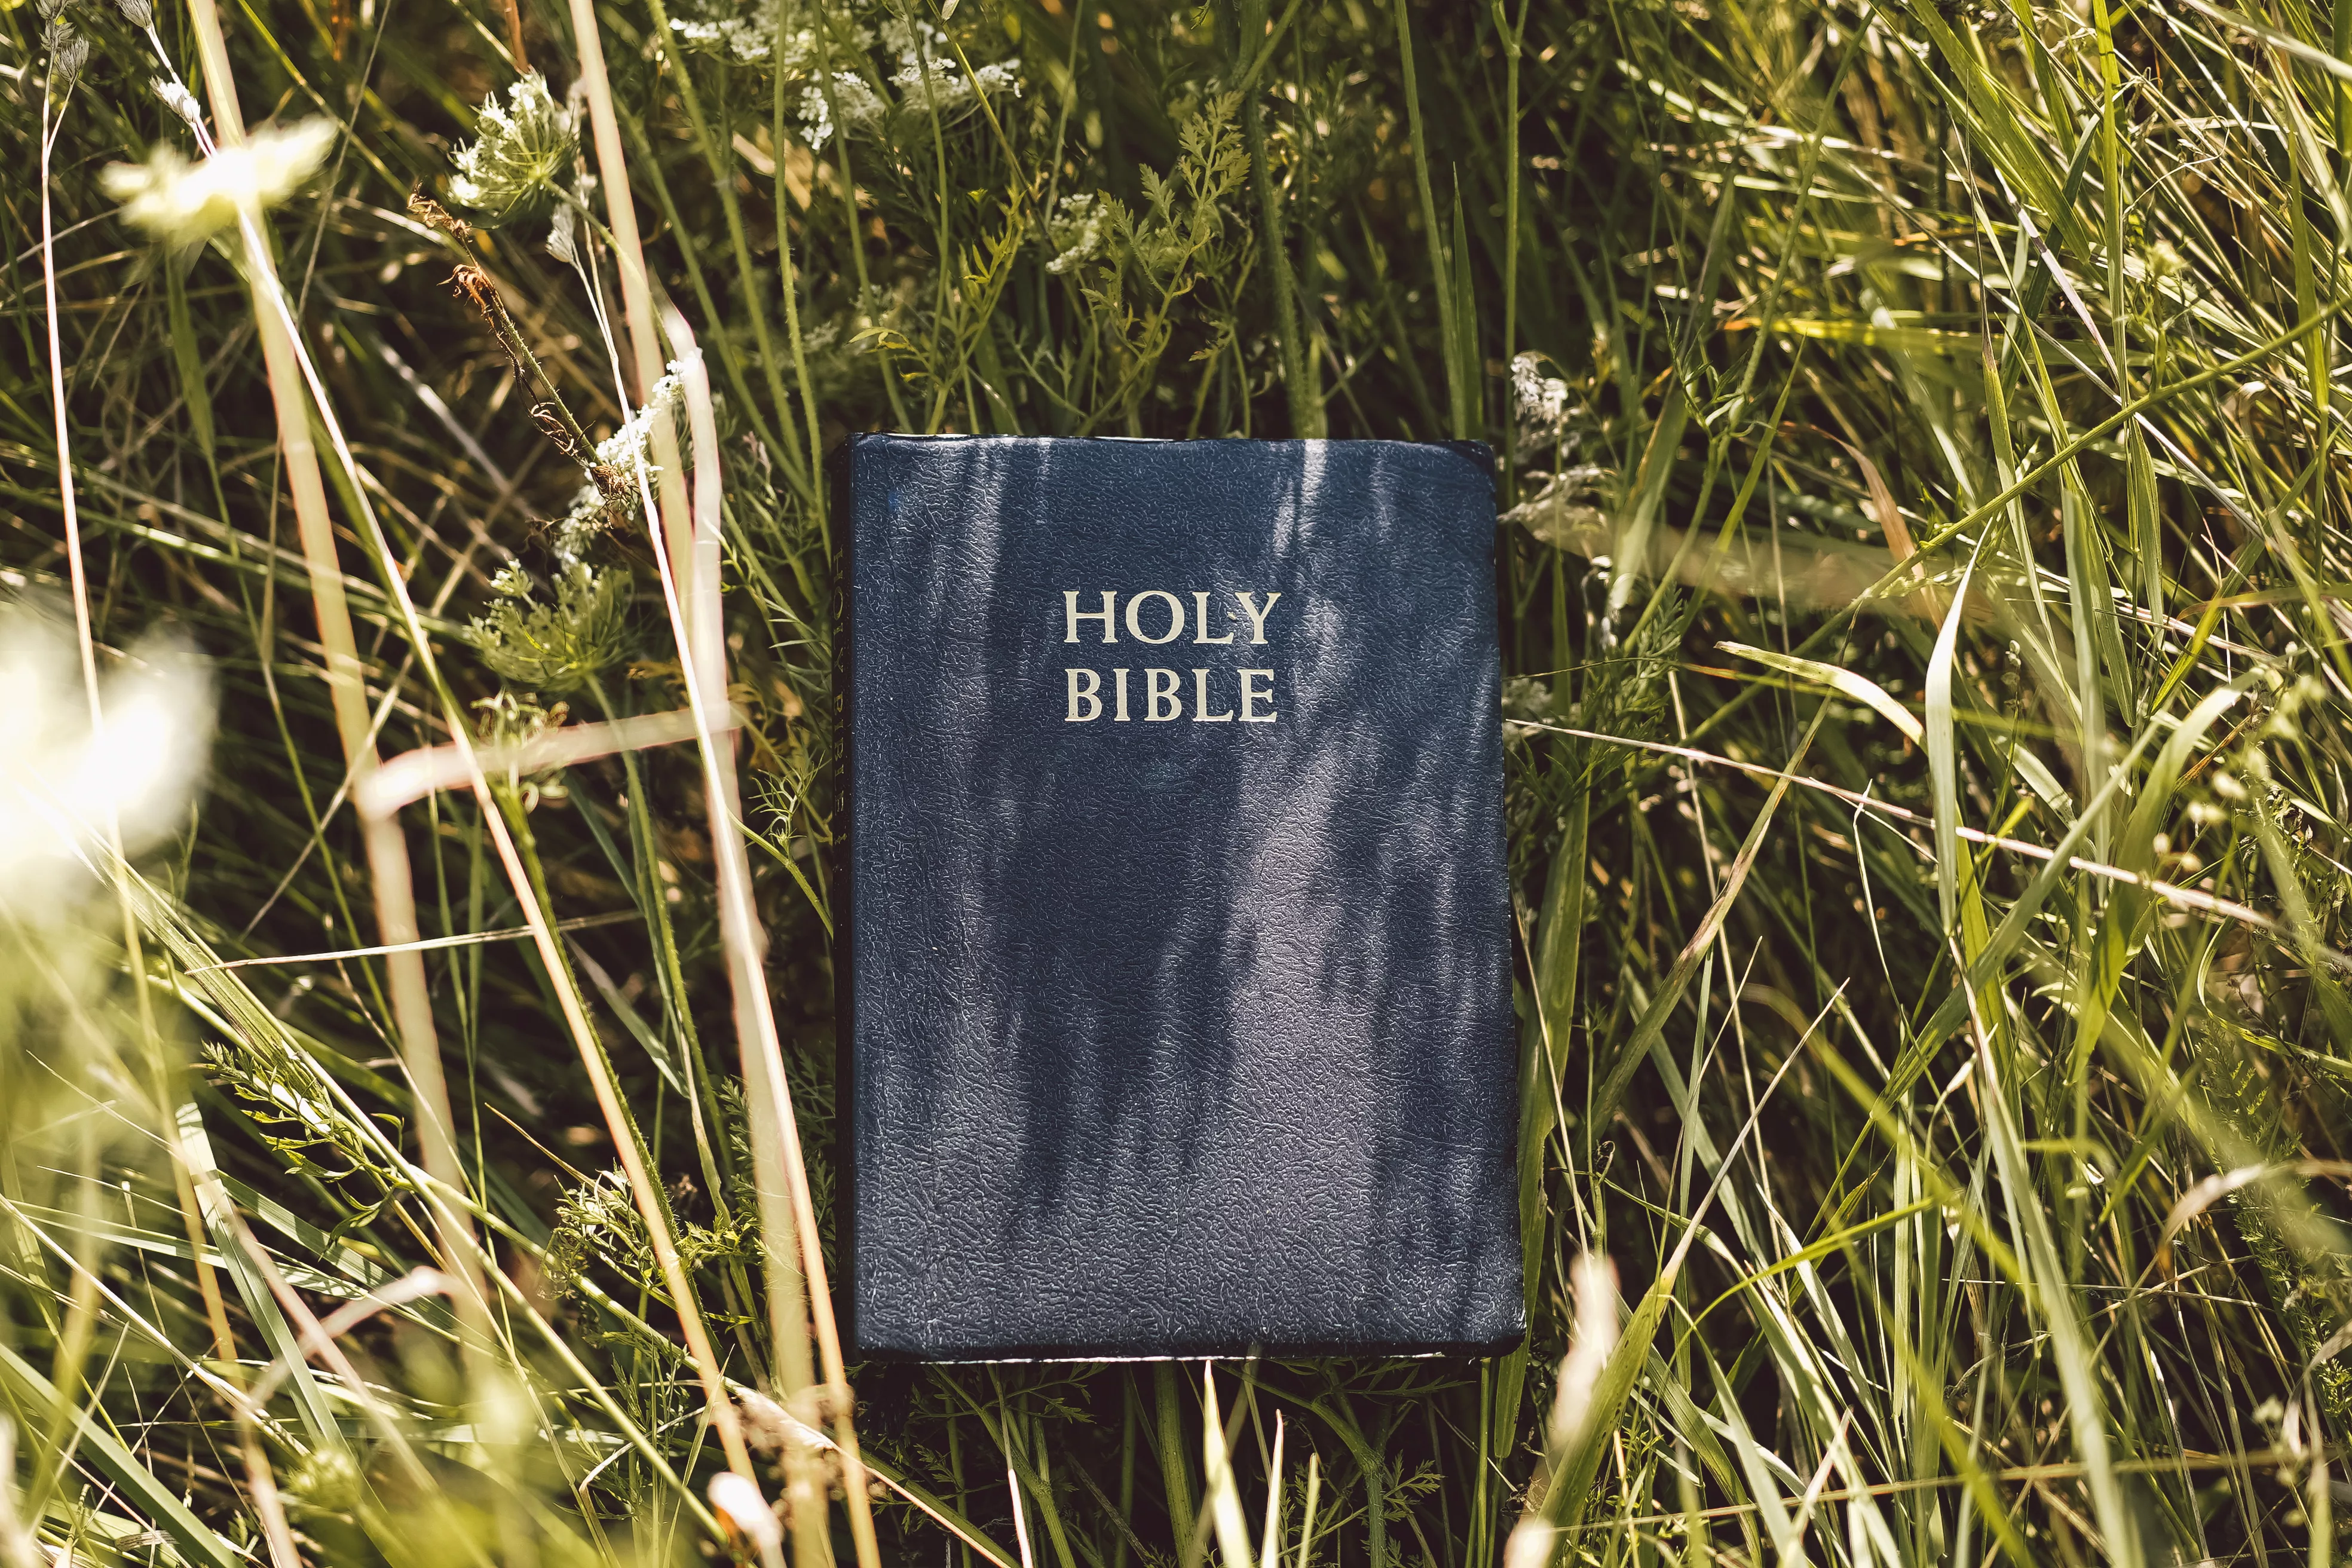 Bible in the grass, like those distributed by gideons international